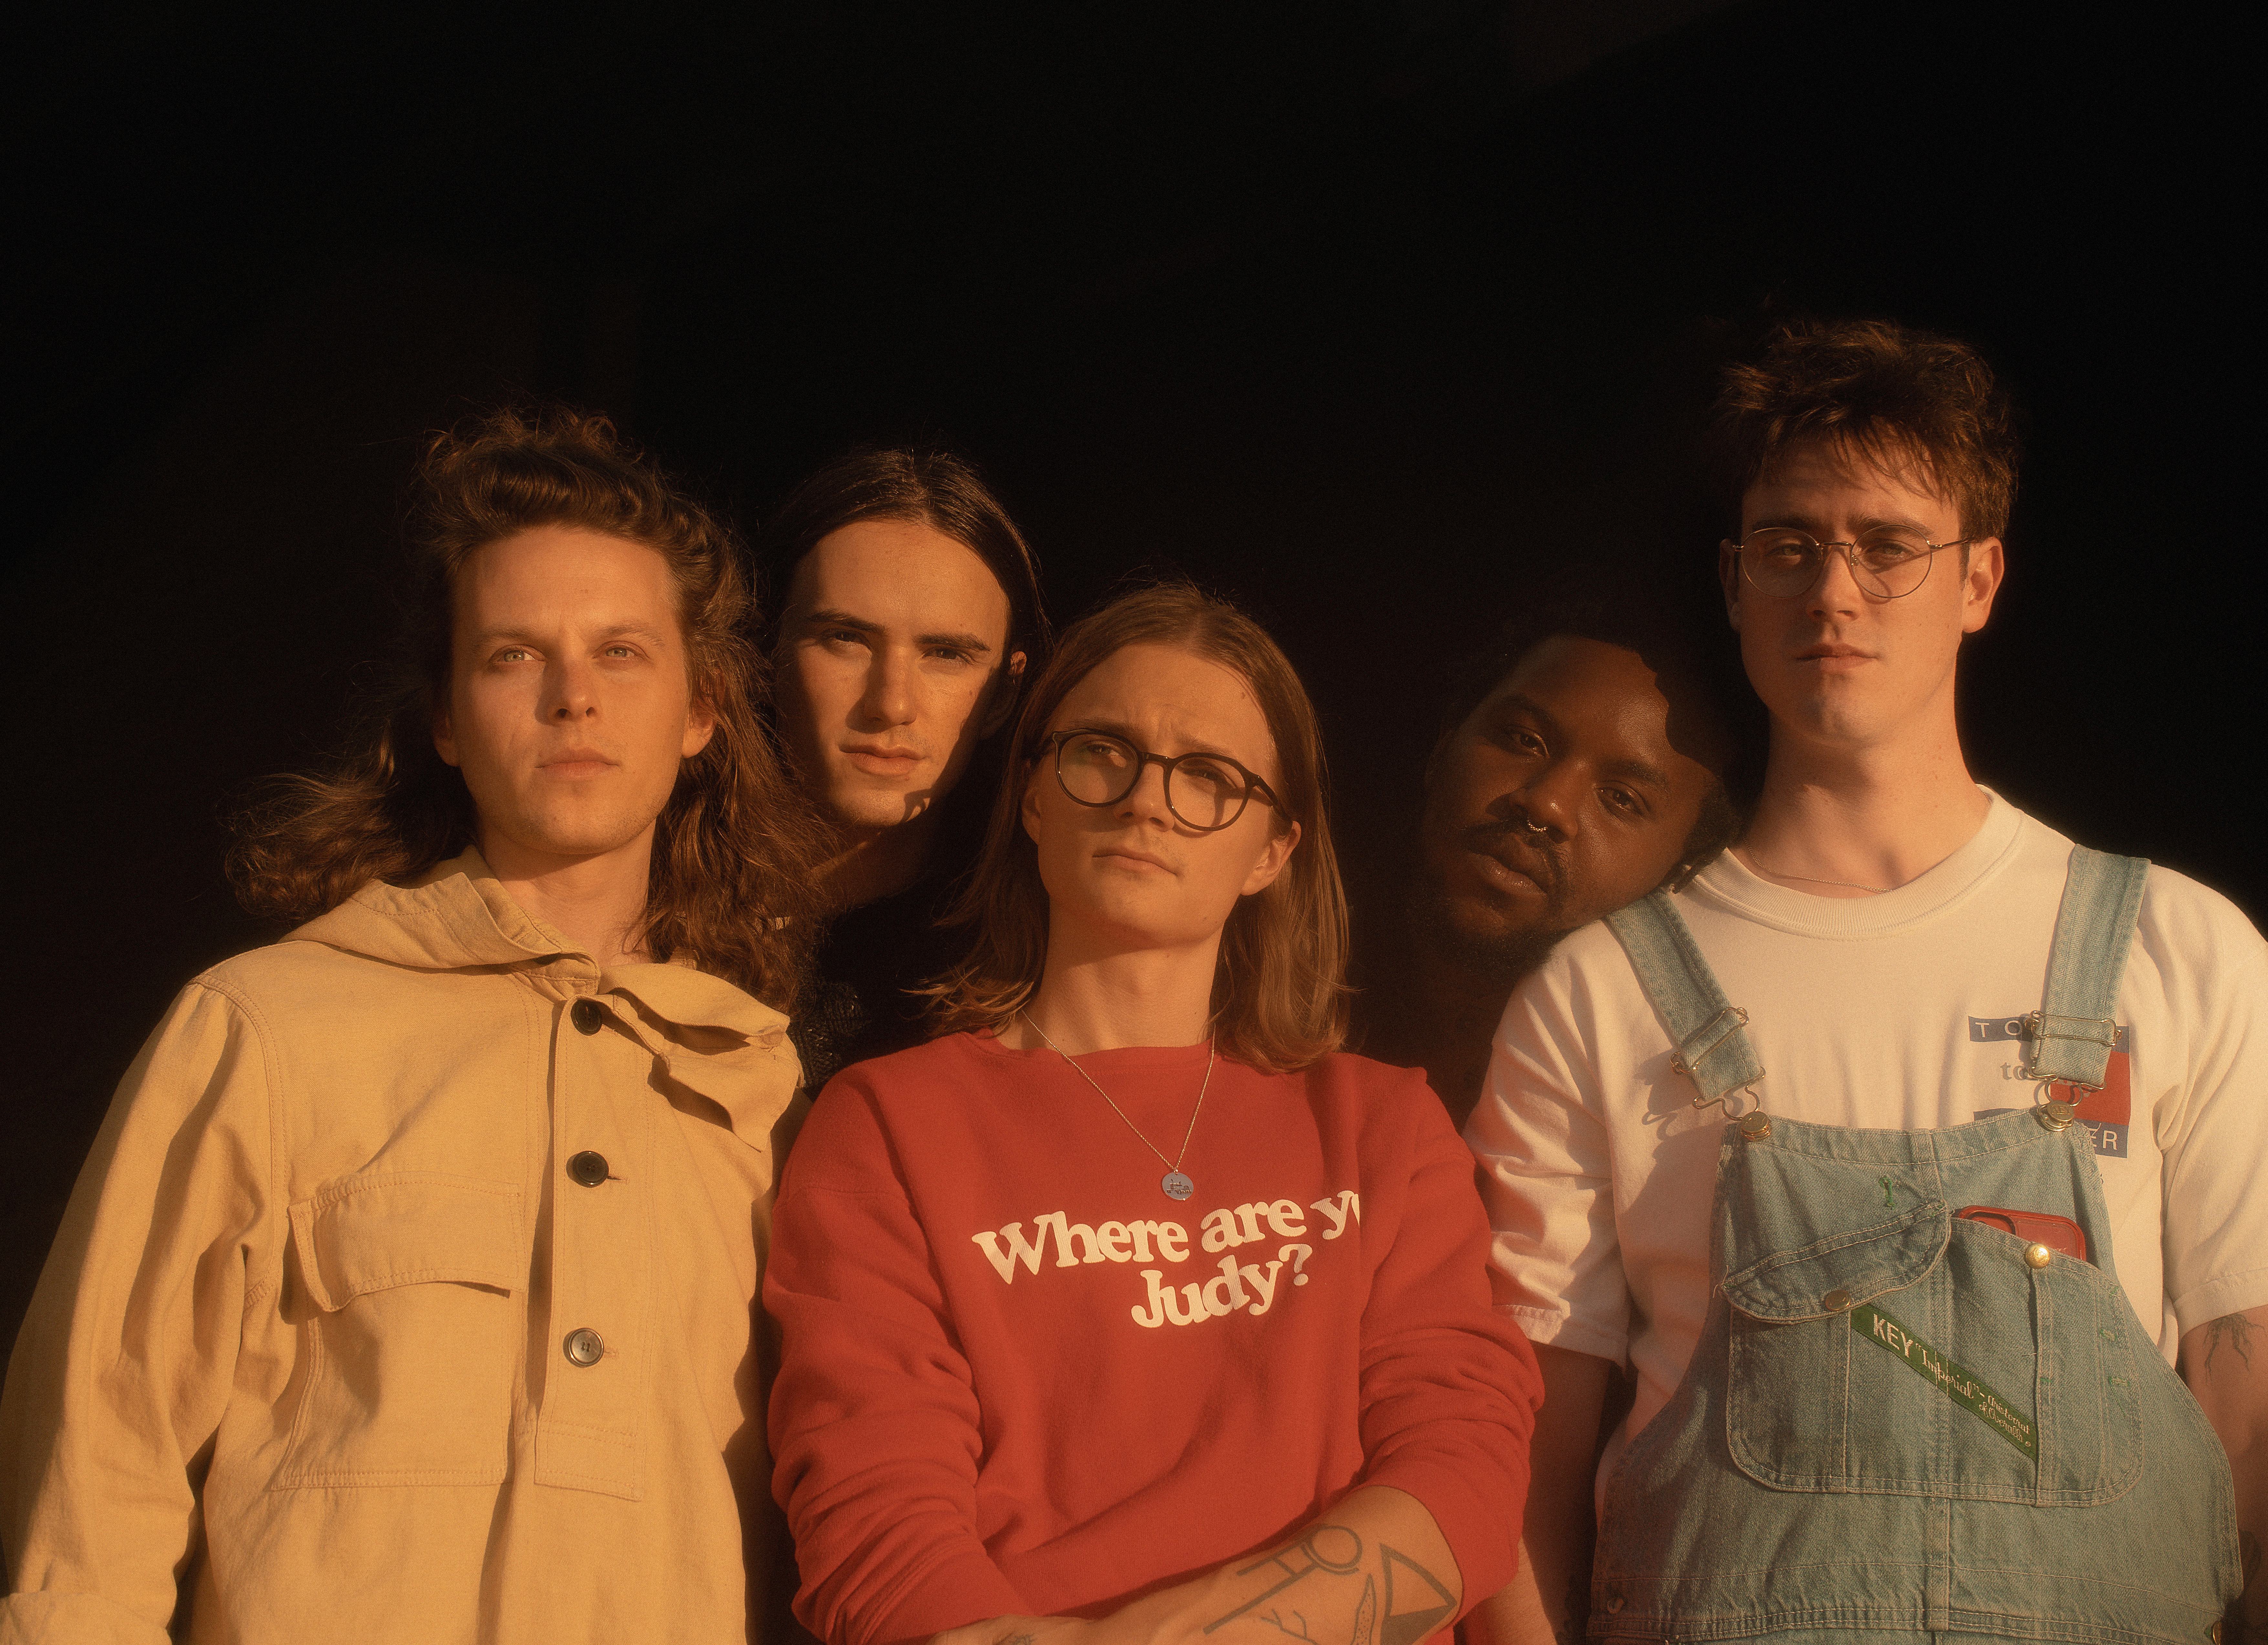 How Hippo Campus channelled their chemistry into making honest art